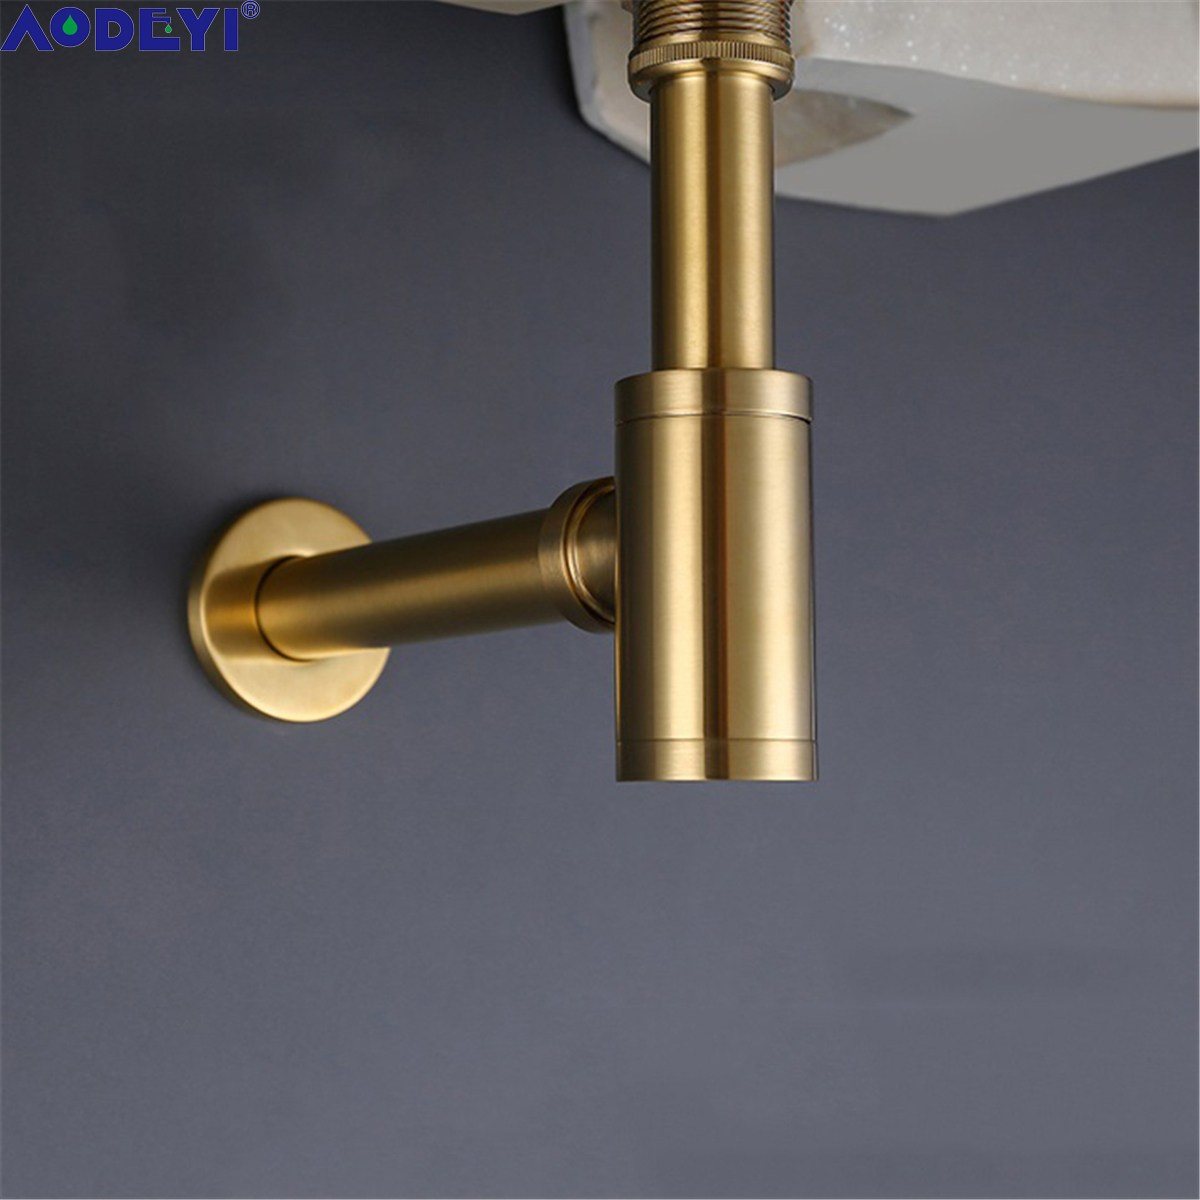 Picture of: AODEYI Brass Bathroom Basin Bottle Trap, Brushed Gold P Trap with Unslotted  Pop Up Drain Slotted Strainer